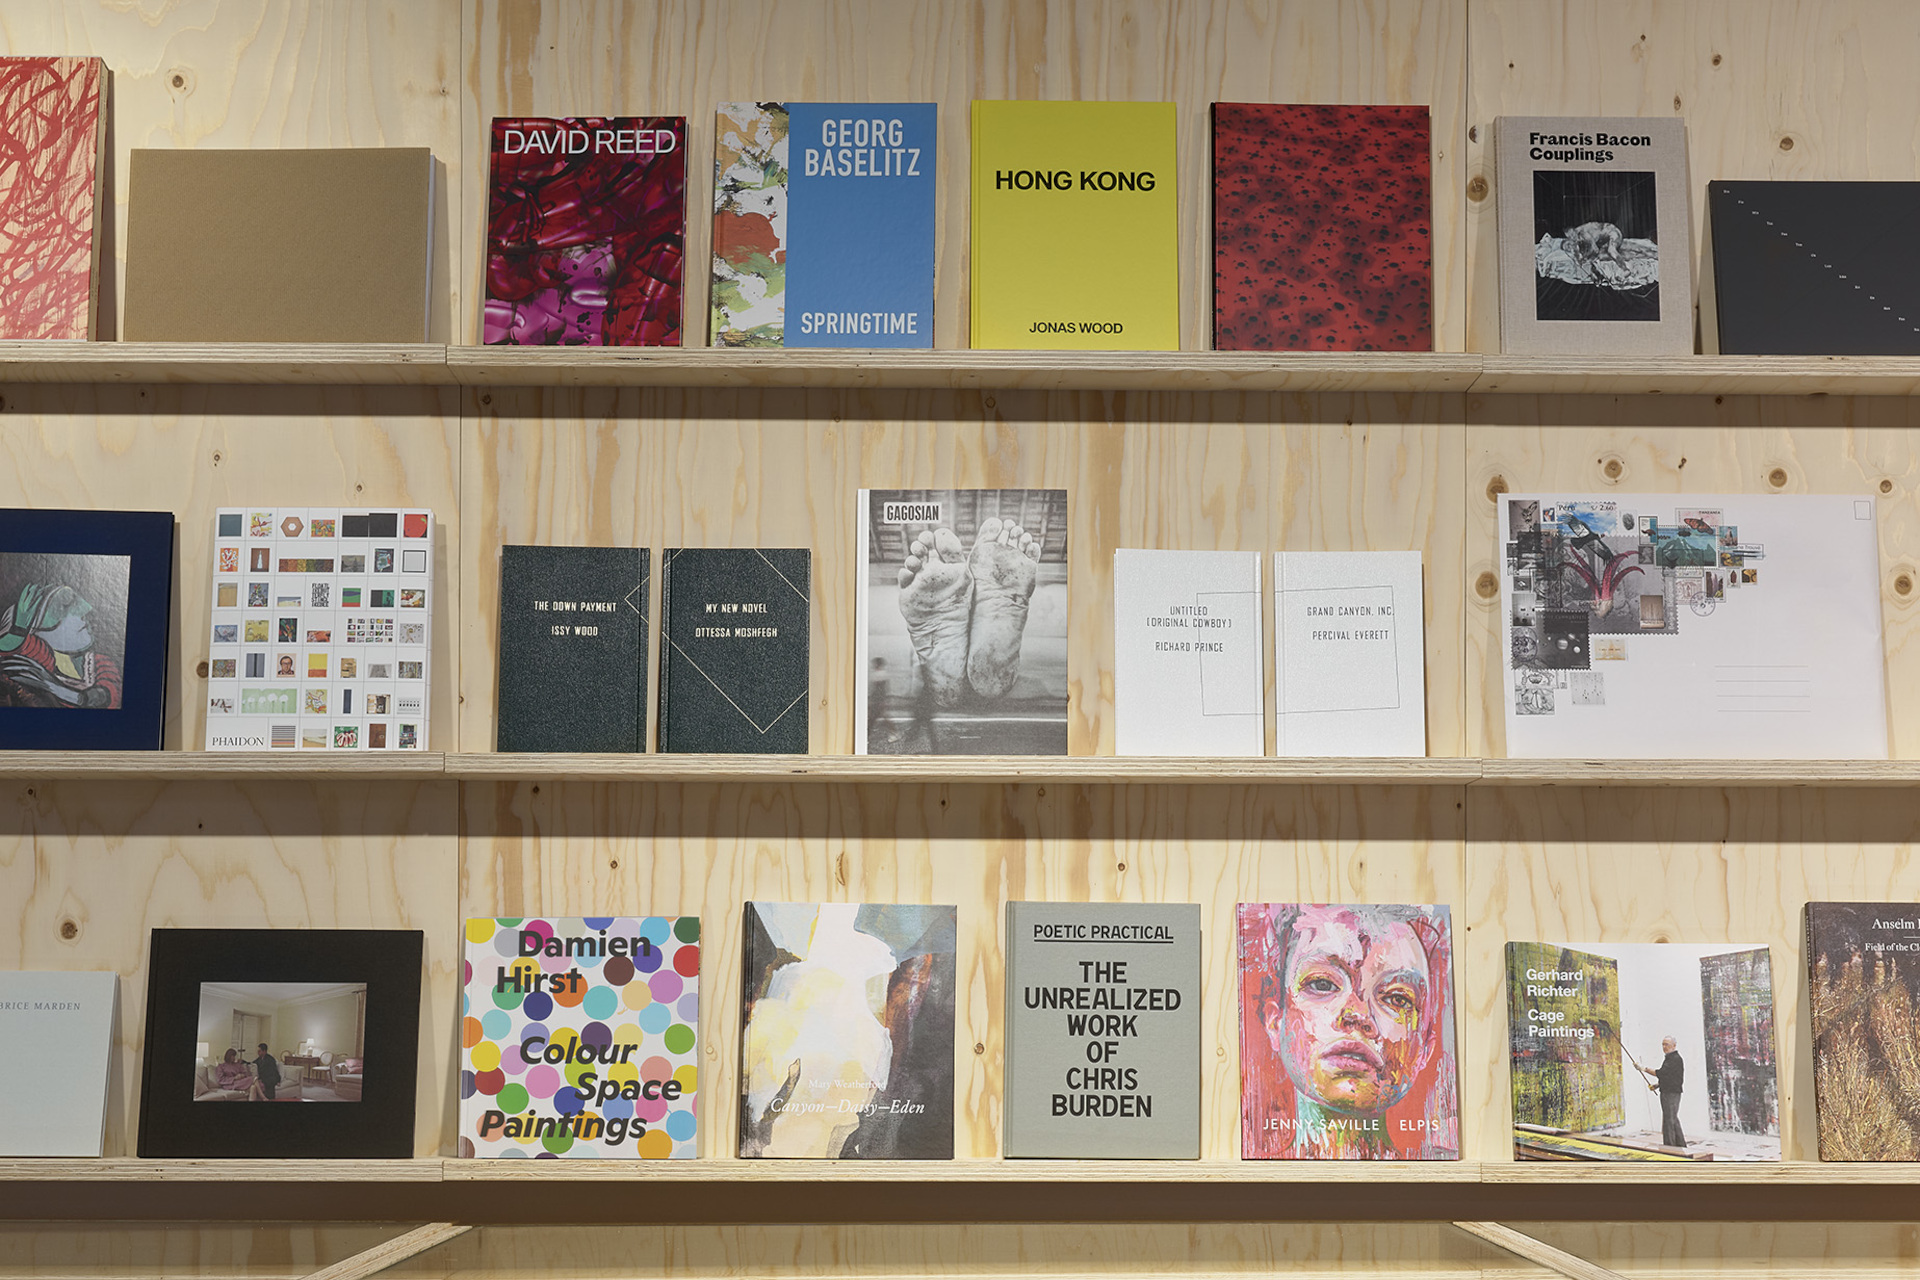 Shop shelves filled with art books